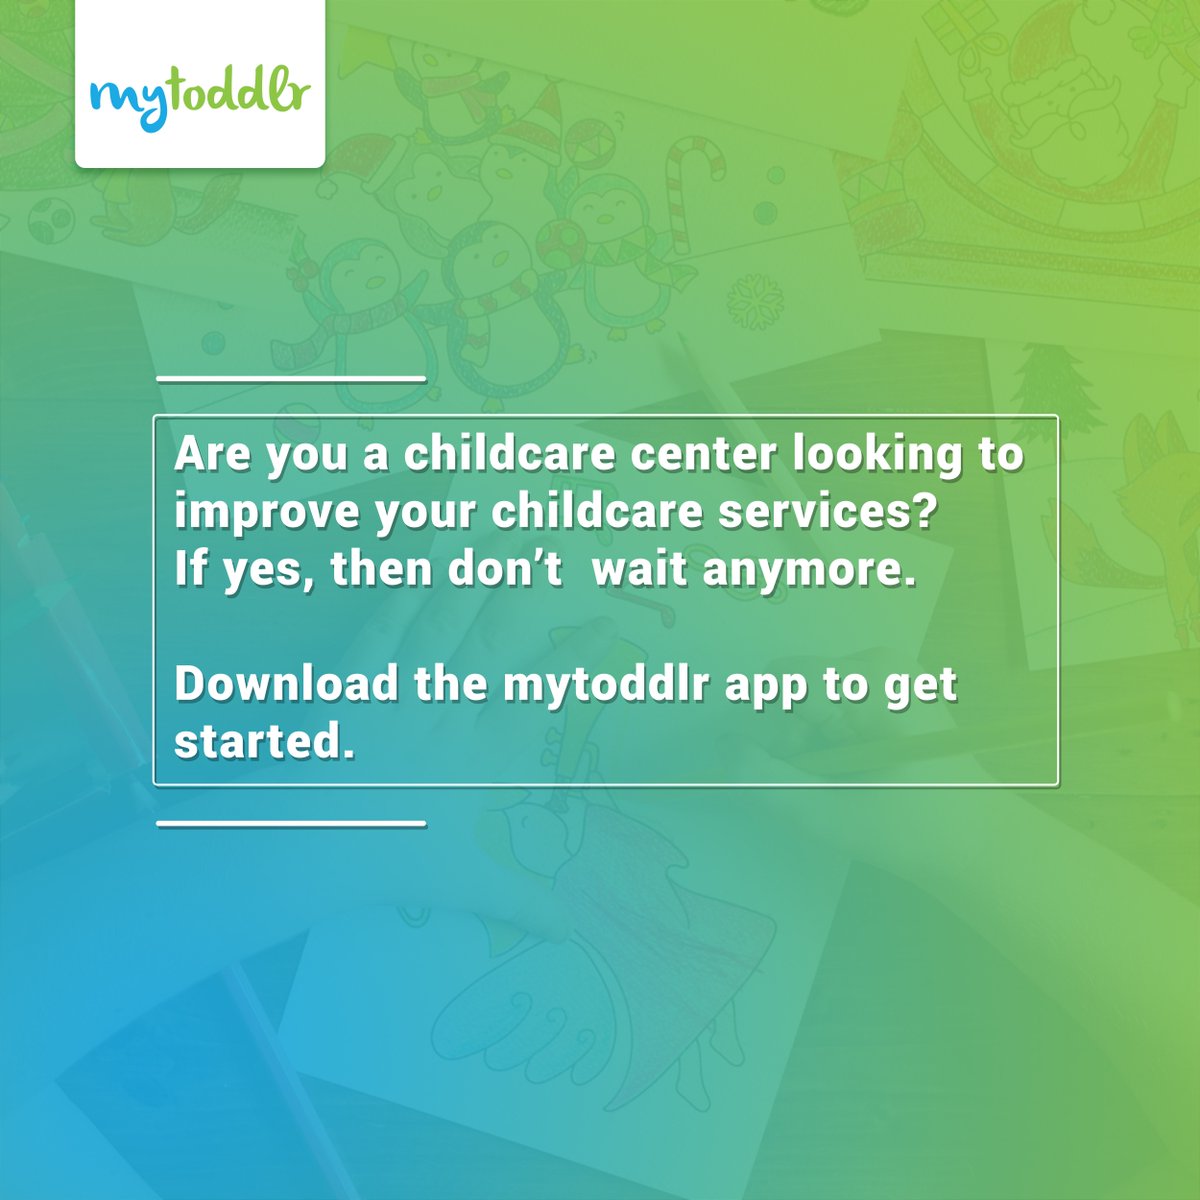 Are you a childcare center looking to improve your childcare services? If yes, then don’t wait anymore. Download the mytoddlr app to get started. #mytoddlr #childcare #childcareapp #childcarecenter #childcareprovider #childcaretips #childcaregiver #preschool #toddlers #parenting